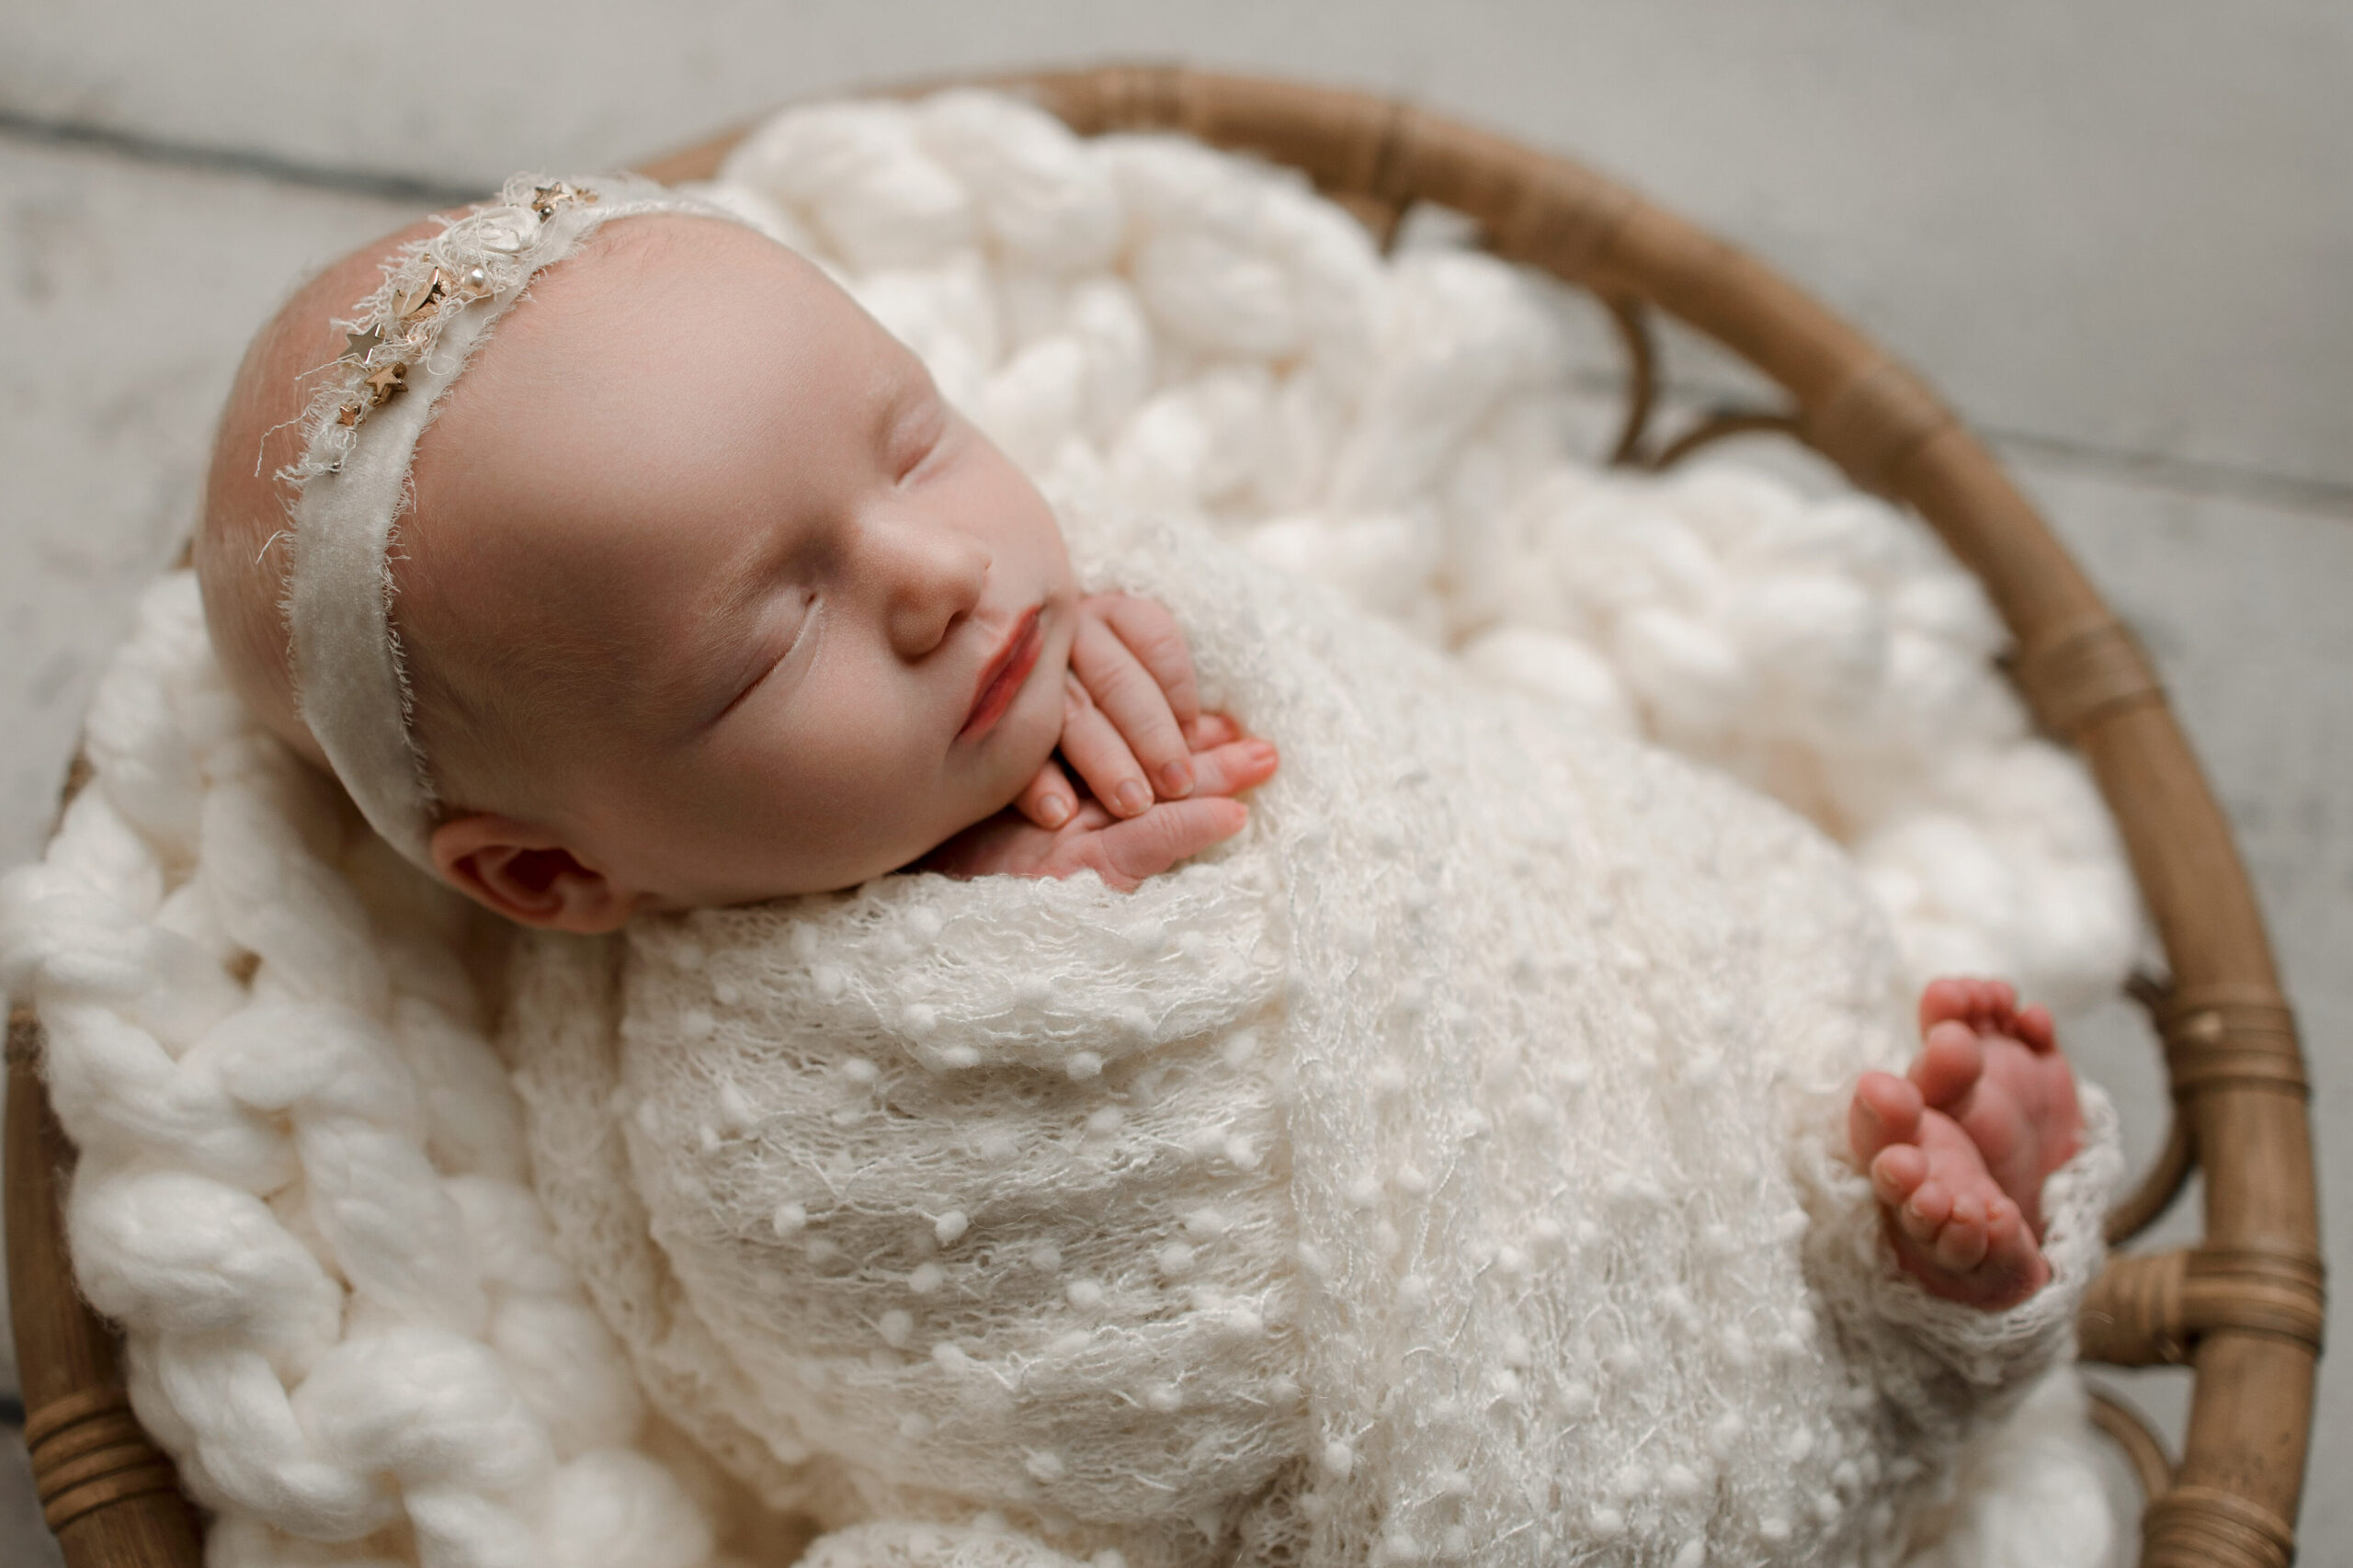 Want a perfect newborn photo like this one? I'm sharing 7 tips just for you.